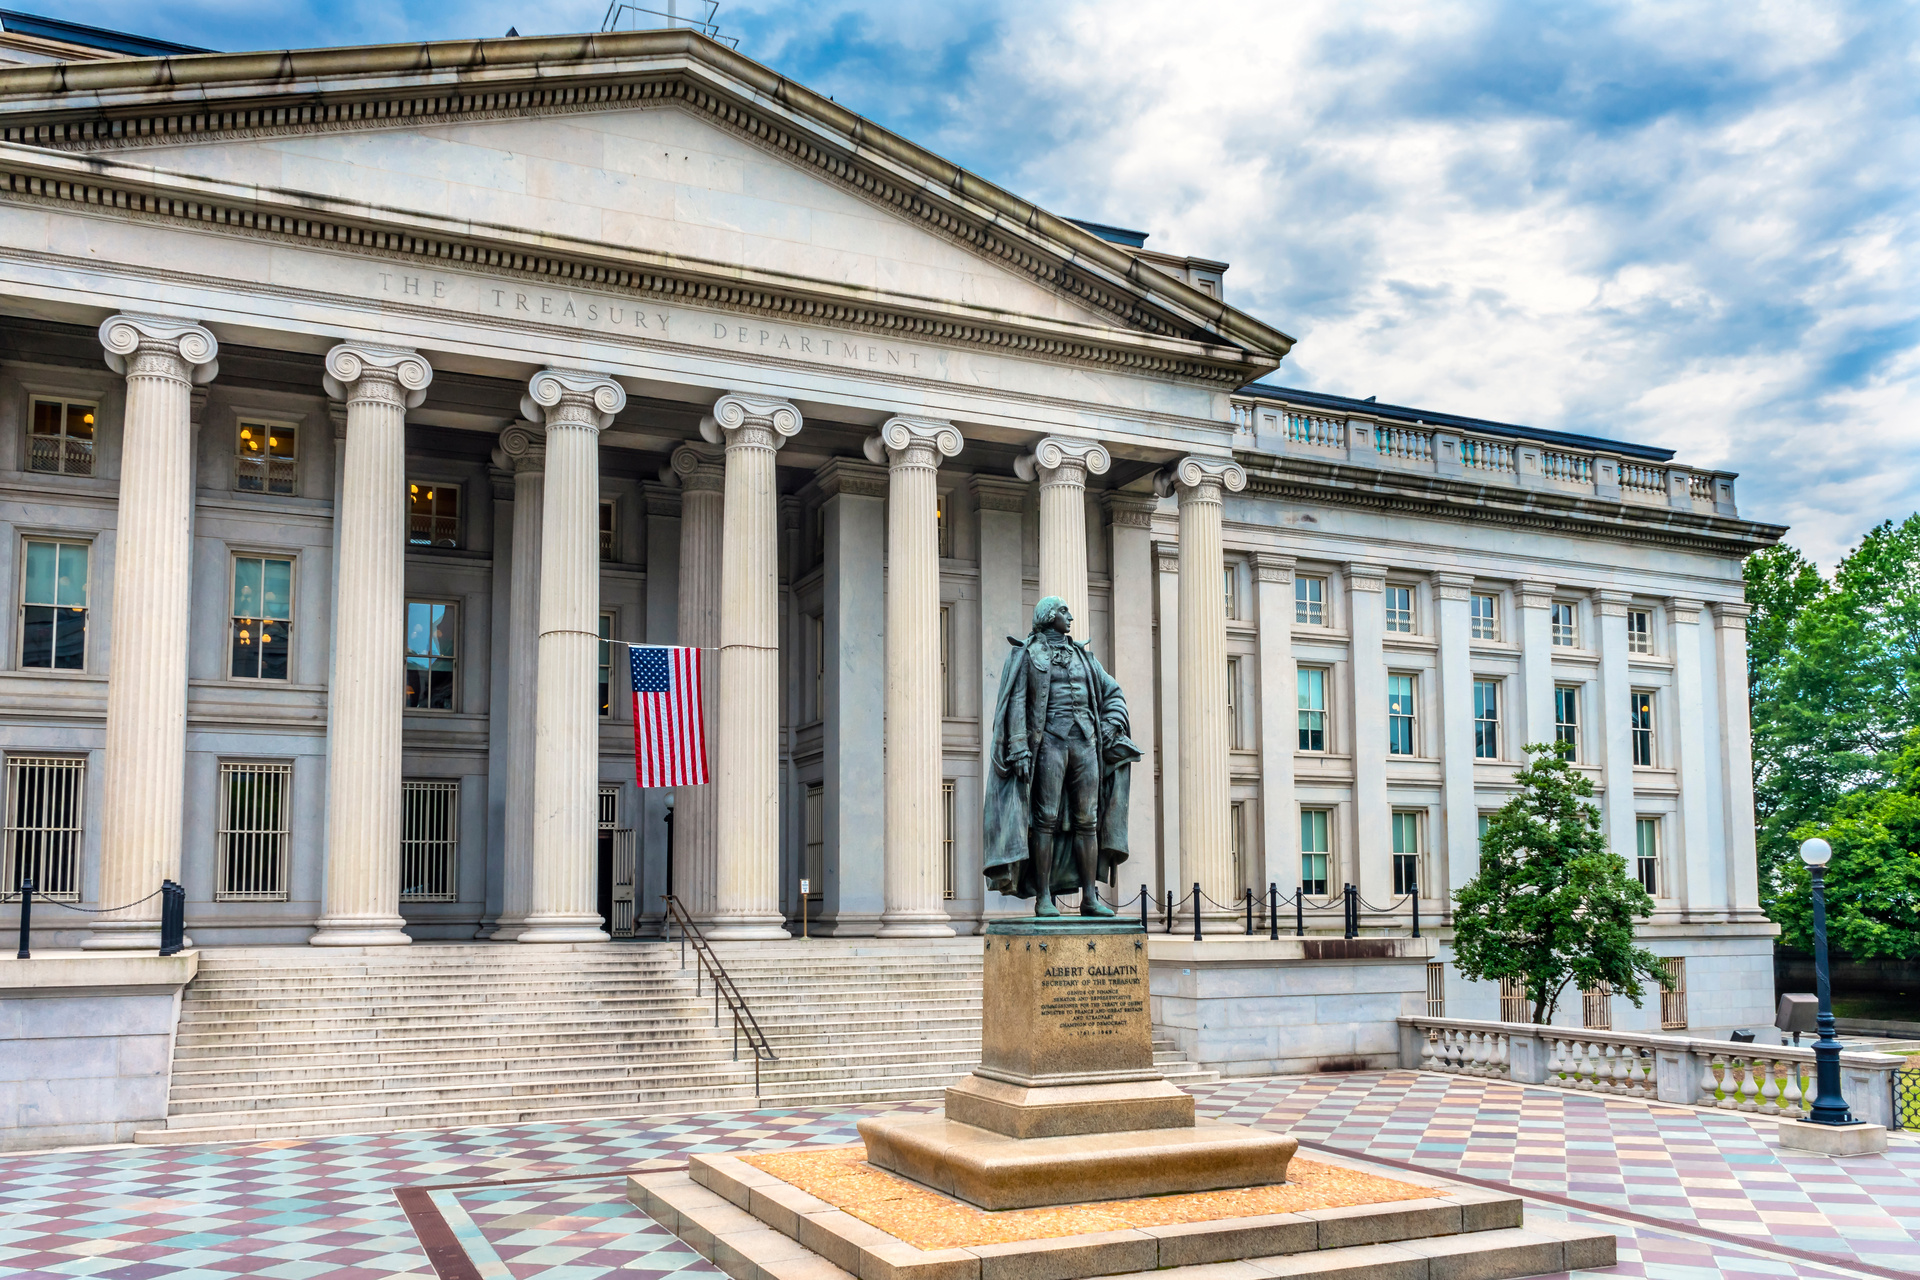 US Treasury building - related to corporate transparency act.  CT Corporation can help.